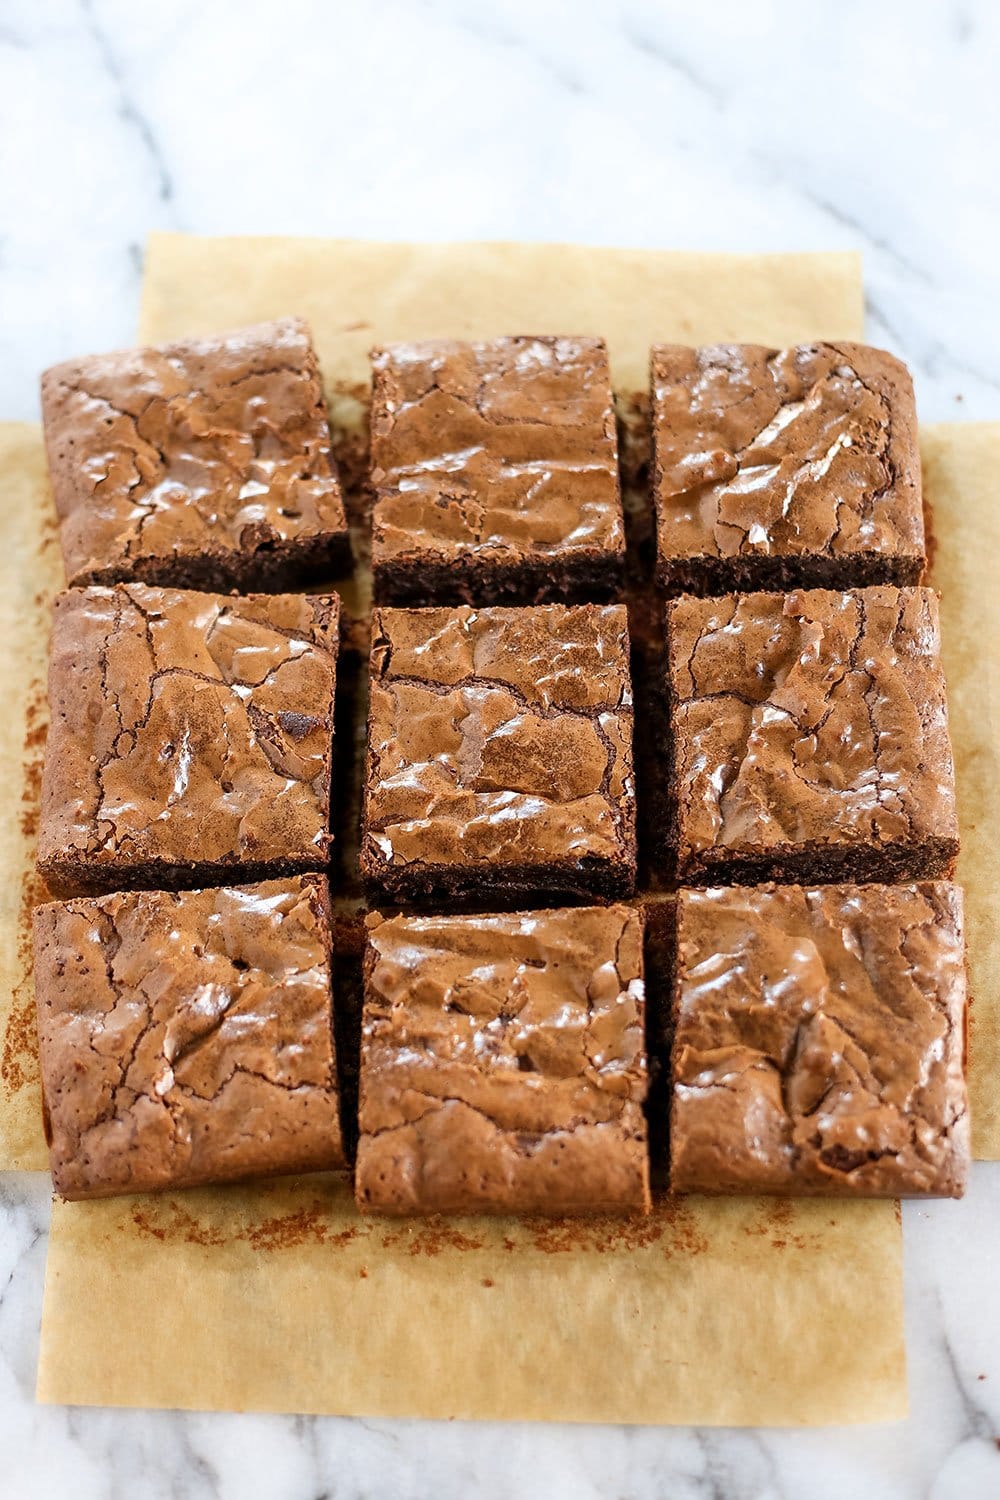 Best Easy Brownies require just 1 bowl, no mixer, and take less than an hour to make! They're tall, fudgy, and chewy with that thin shiny crust on top and tons of chocolate flavor.